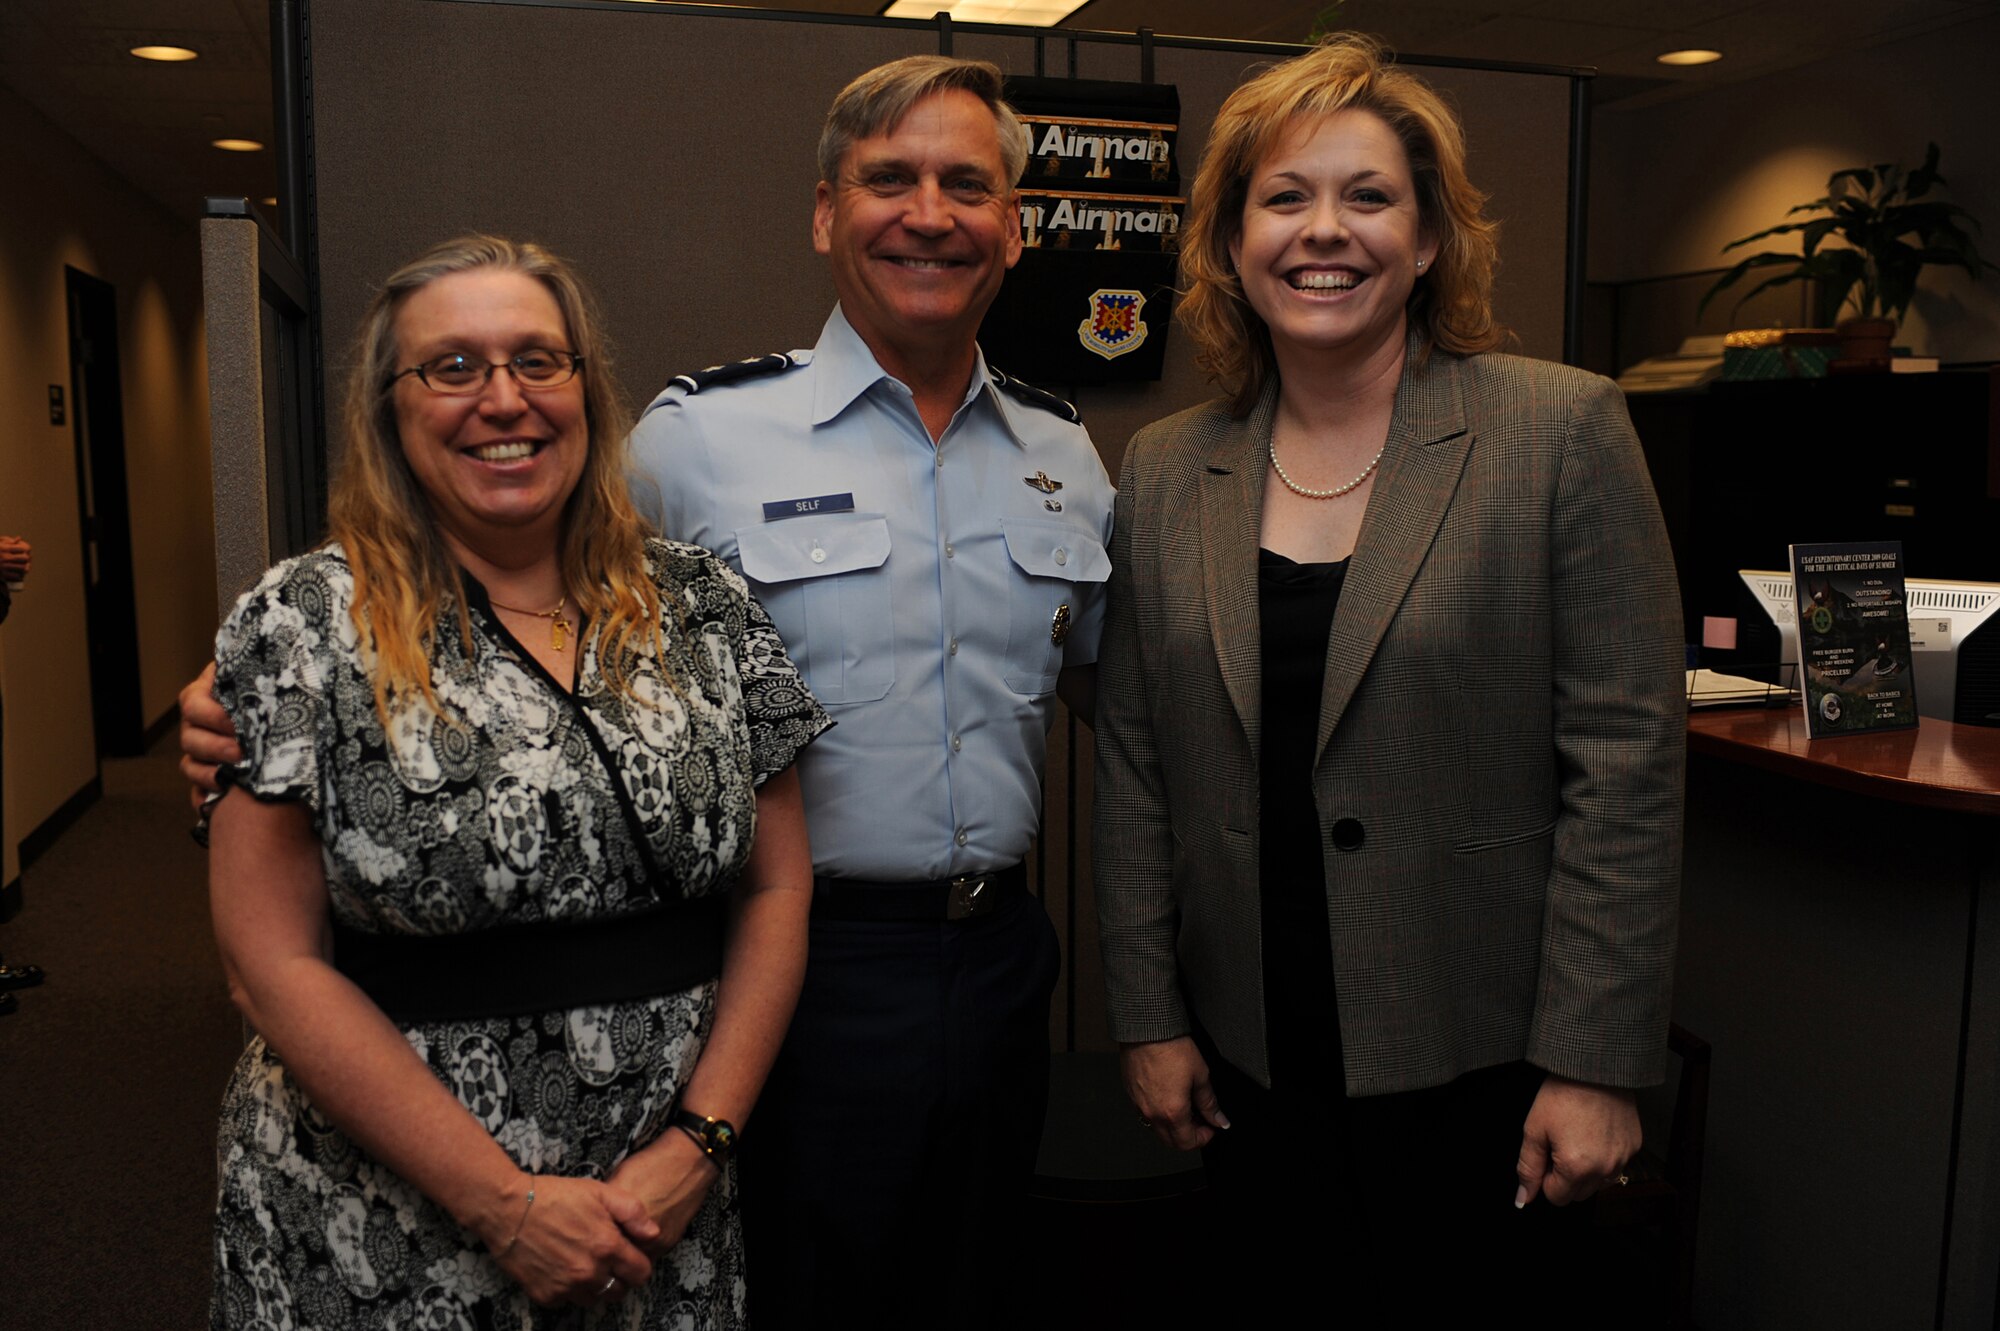 Maj. Gen. Kip Self, U.S. Air Force Expeditionary Center commander, stops for a photo with Mrs. Christy Dickinson, financial manager, and Ms. Sandra Lewis, resource advisor, both with the Expeditionary Center, June 15 on Joint Base McGuire-Dix-Lakehurst, N.J.  Mrs. Dickinson and Ms. Lewis saved the life of Master Sgt. Dianna Ackerman after an allergic reaction. They are credited with an immediate response in getting Sergeant Ackerman to a medical facility while on temporary duty in San Antonio, Texas. Sergeant Ackerman is now back home and doing well.  (U.S. Air Force Photo/Staff Sgt. Nathan G. Bevier) 